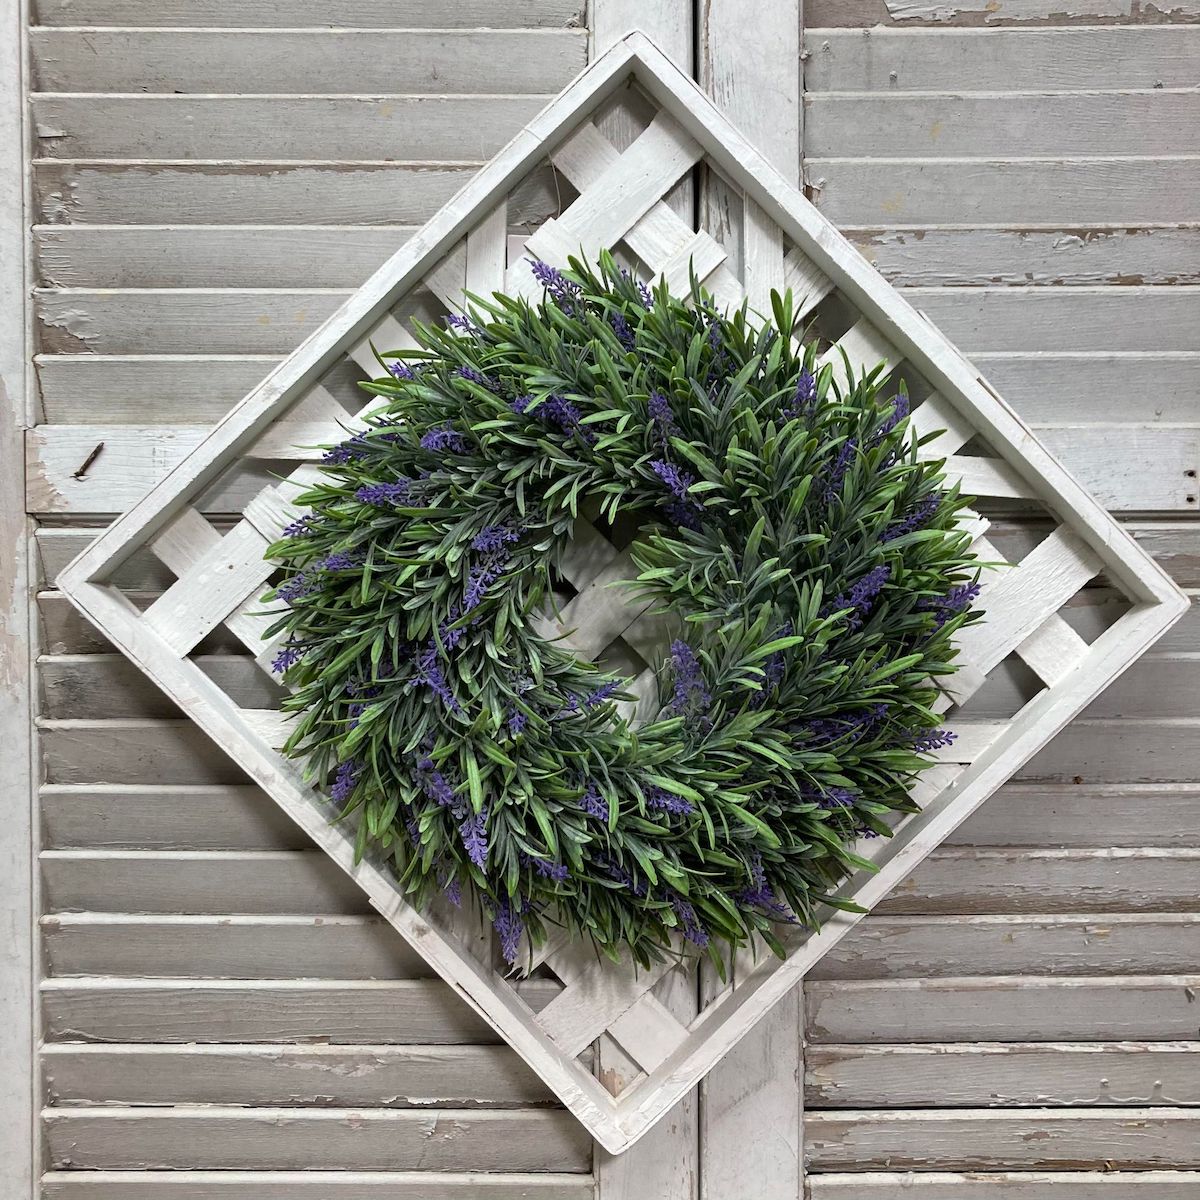 Whitewashed Square Lattice Work Decorative Frame with a Lavender Wreath